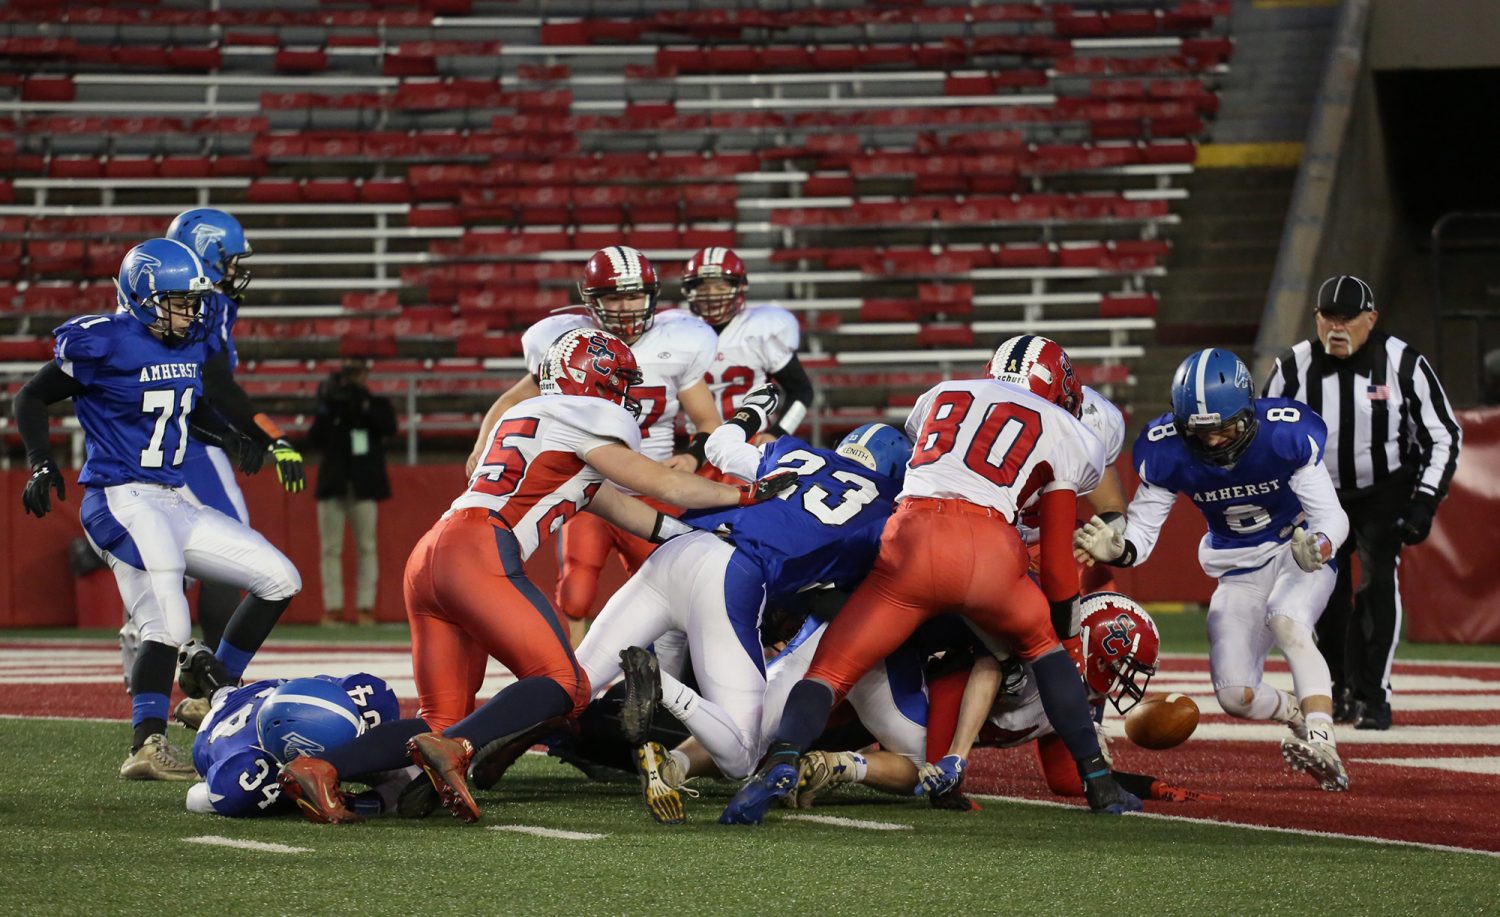 Hunter Luepke’s 4th-and-goal run ends in a fumble before he broke the plane as the Rockets lost to Amherst 42-0 in the WIAA Division 5 State Championship Game at Camp Randall Stadium in Madison, Thursday, Nov. 19, 2015.